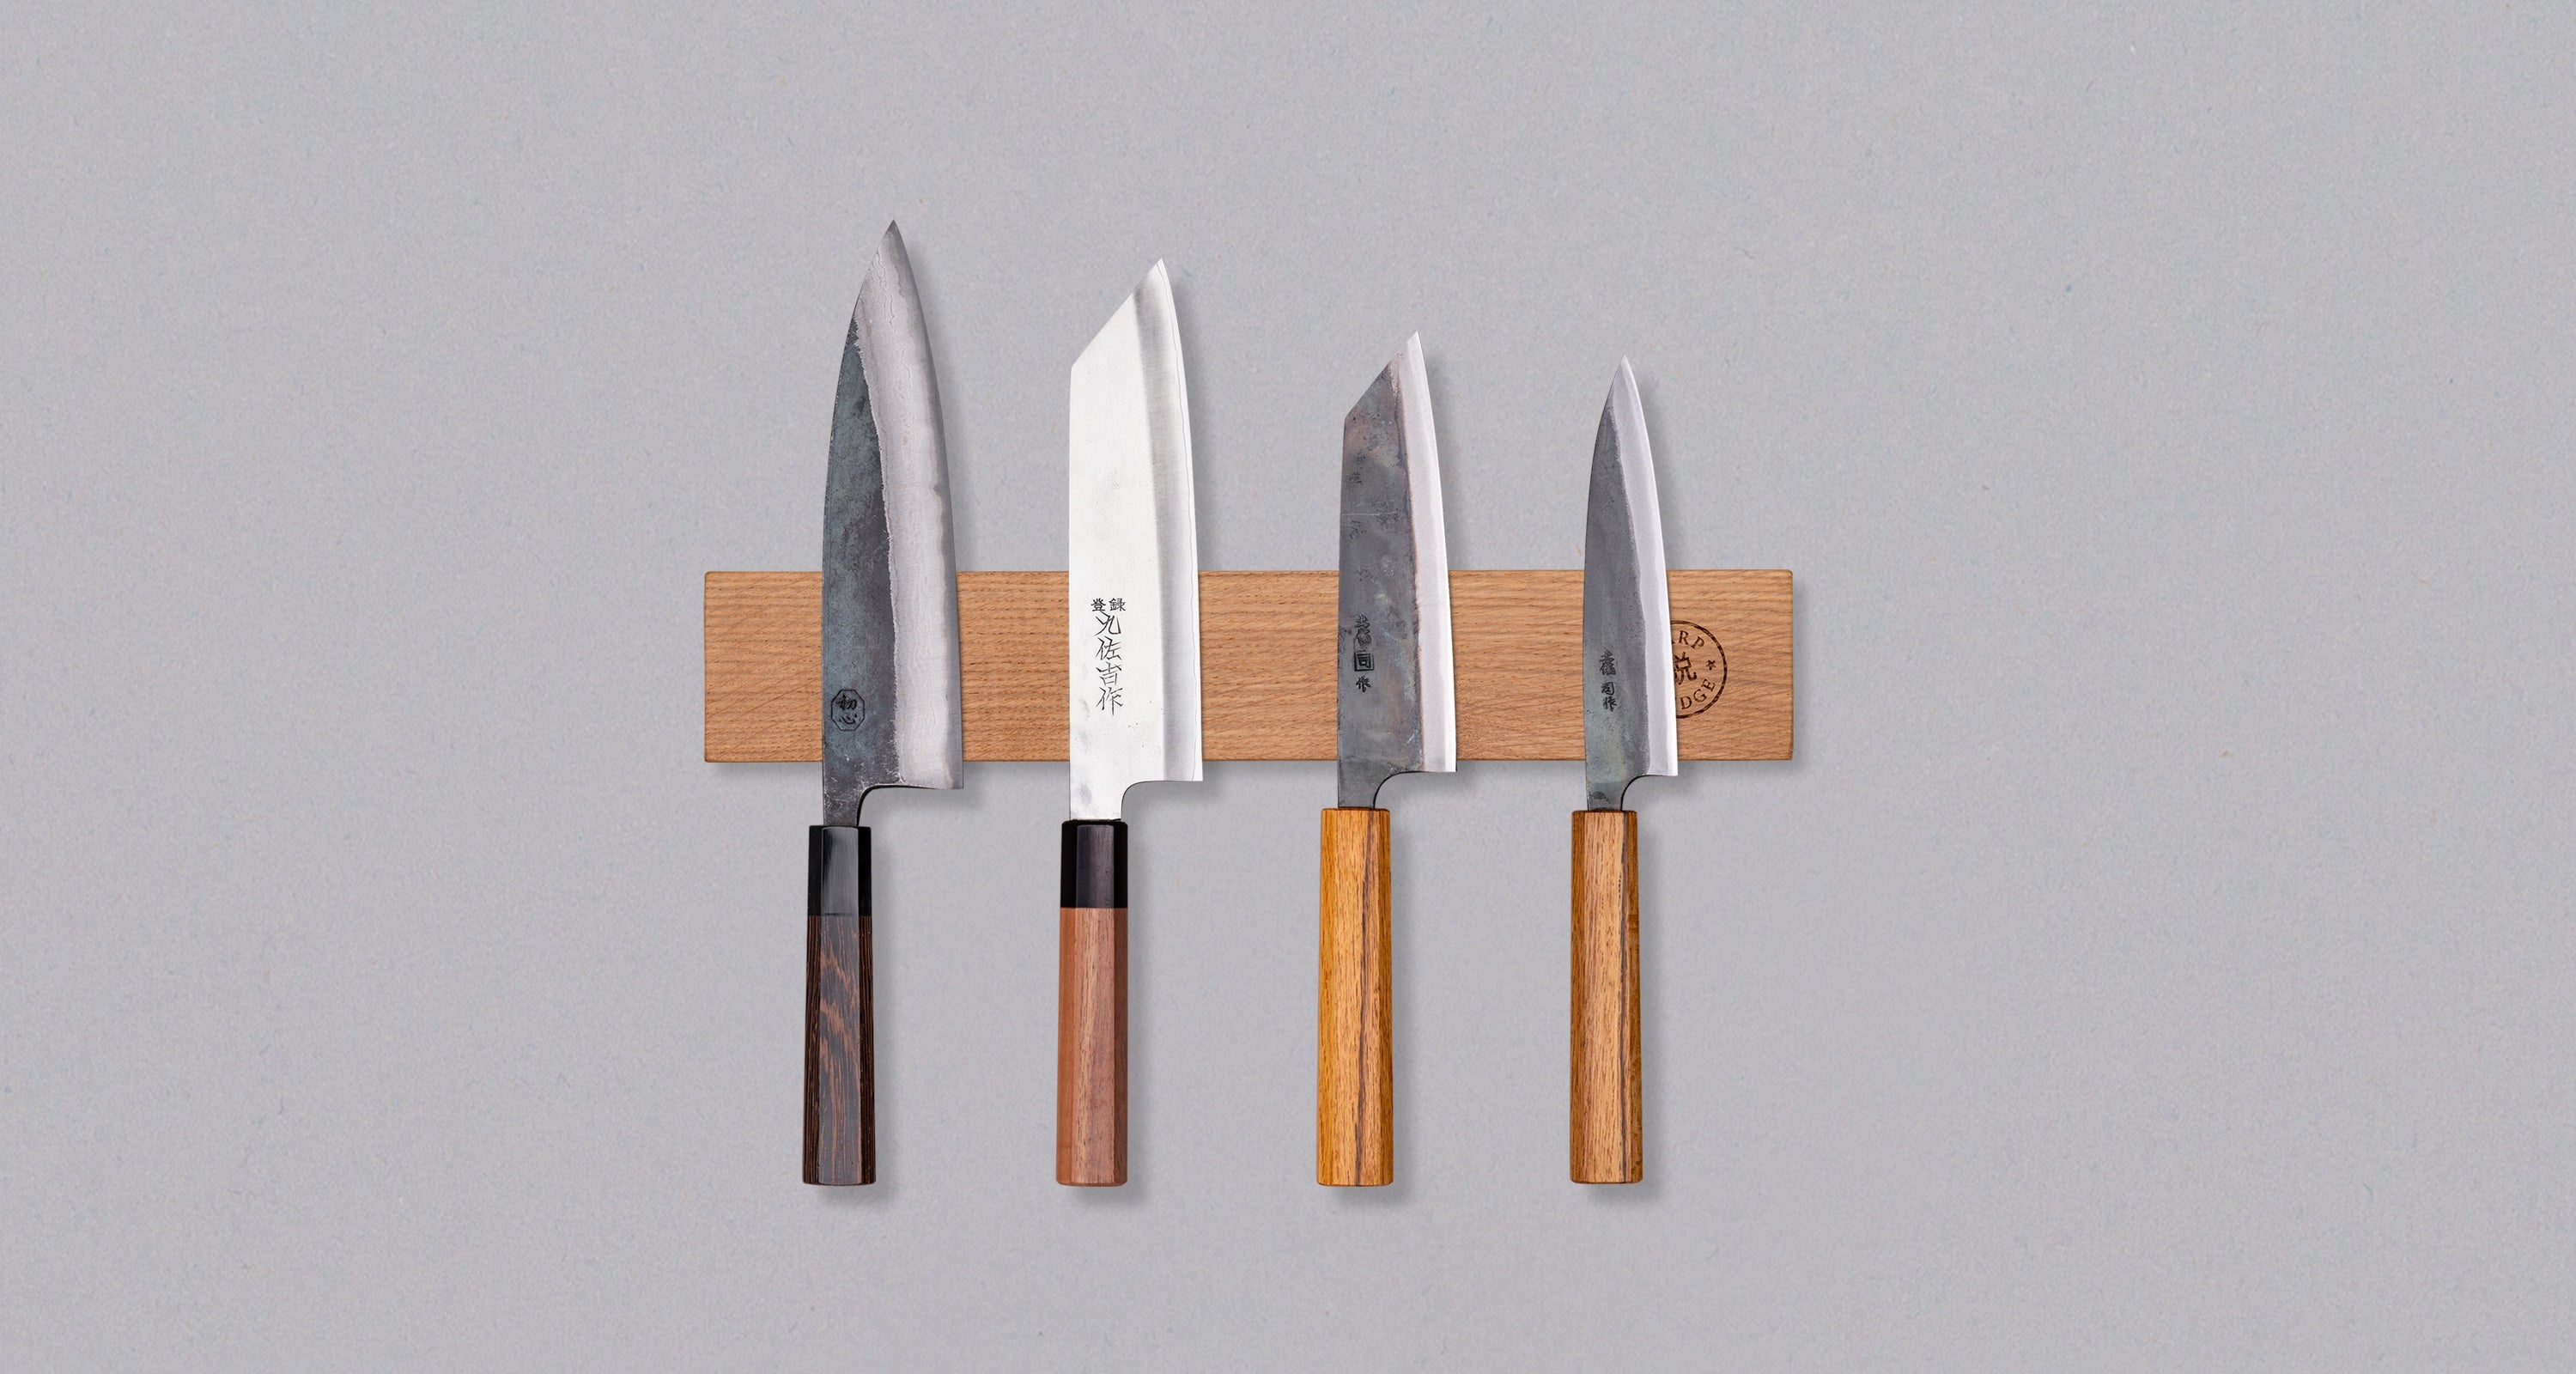 Wooden Magnetic Knife Holder Knife Block Wood and Leather Magnetic